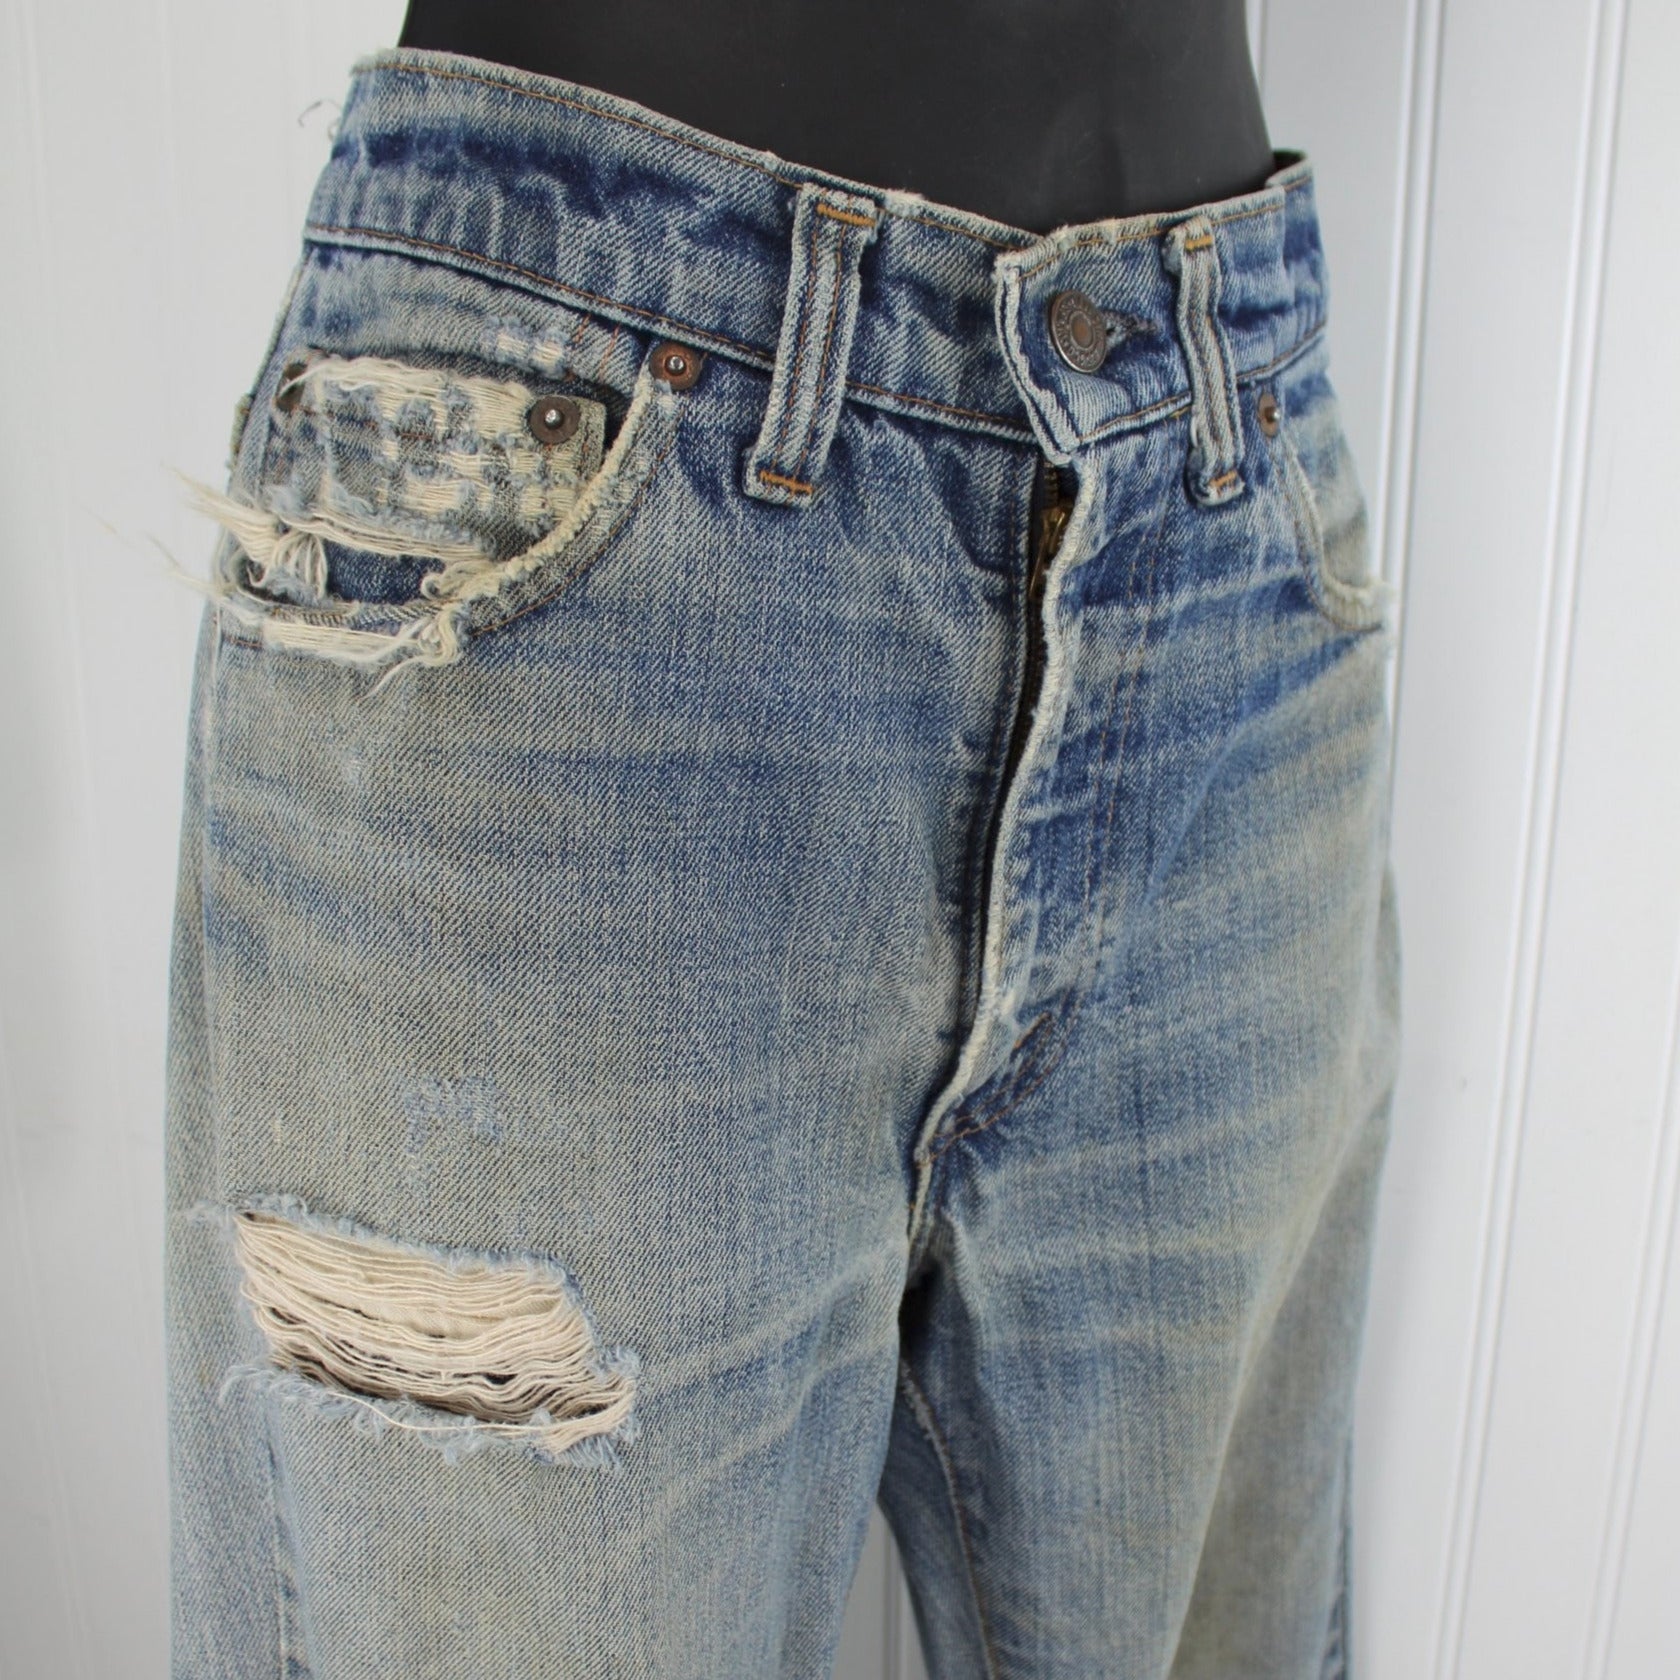 Vintage Levi's Skate Boarder Distressed Grunge  Jeans - Early 1990s - Waist 29" Red Tab  ooak